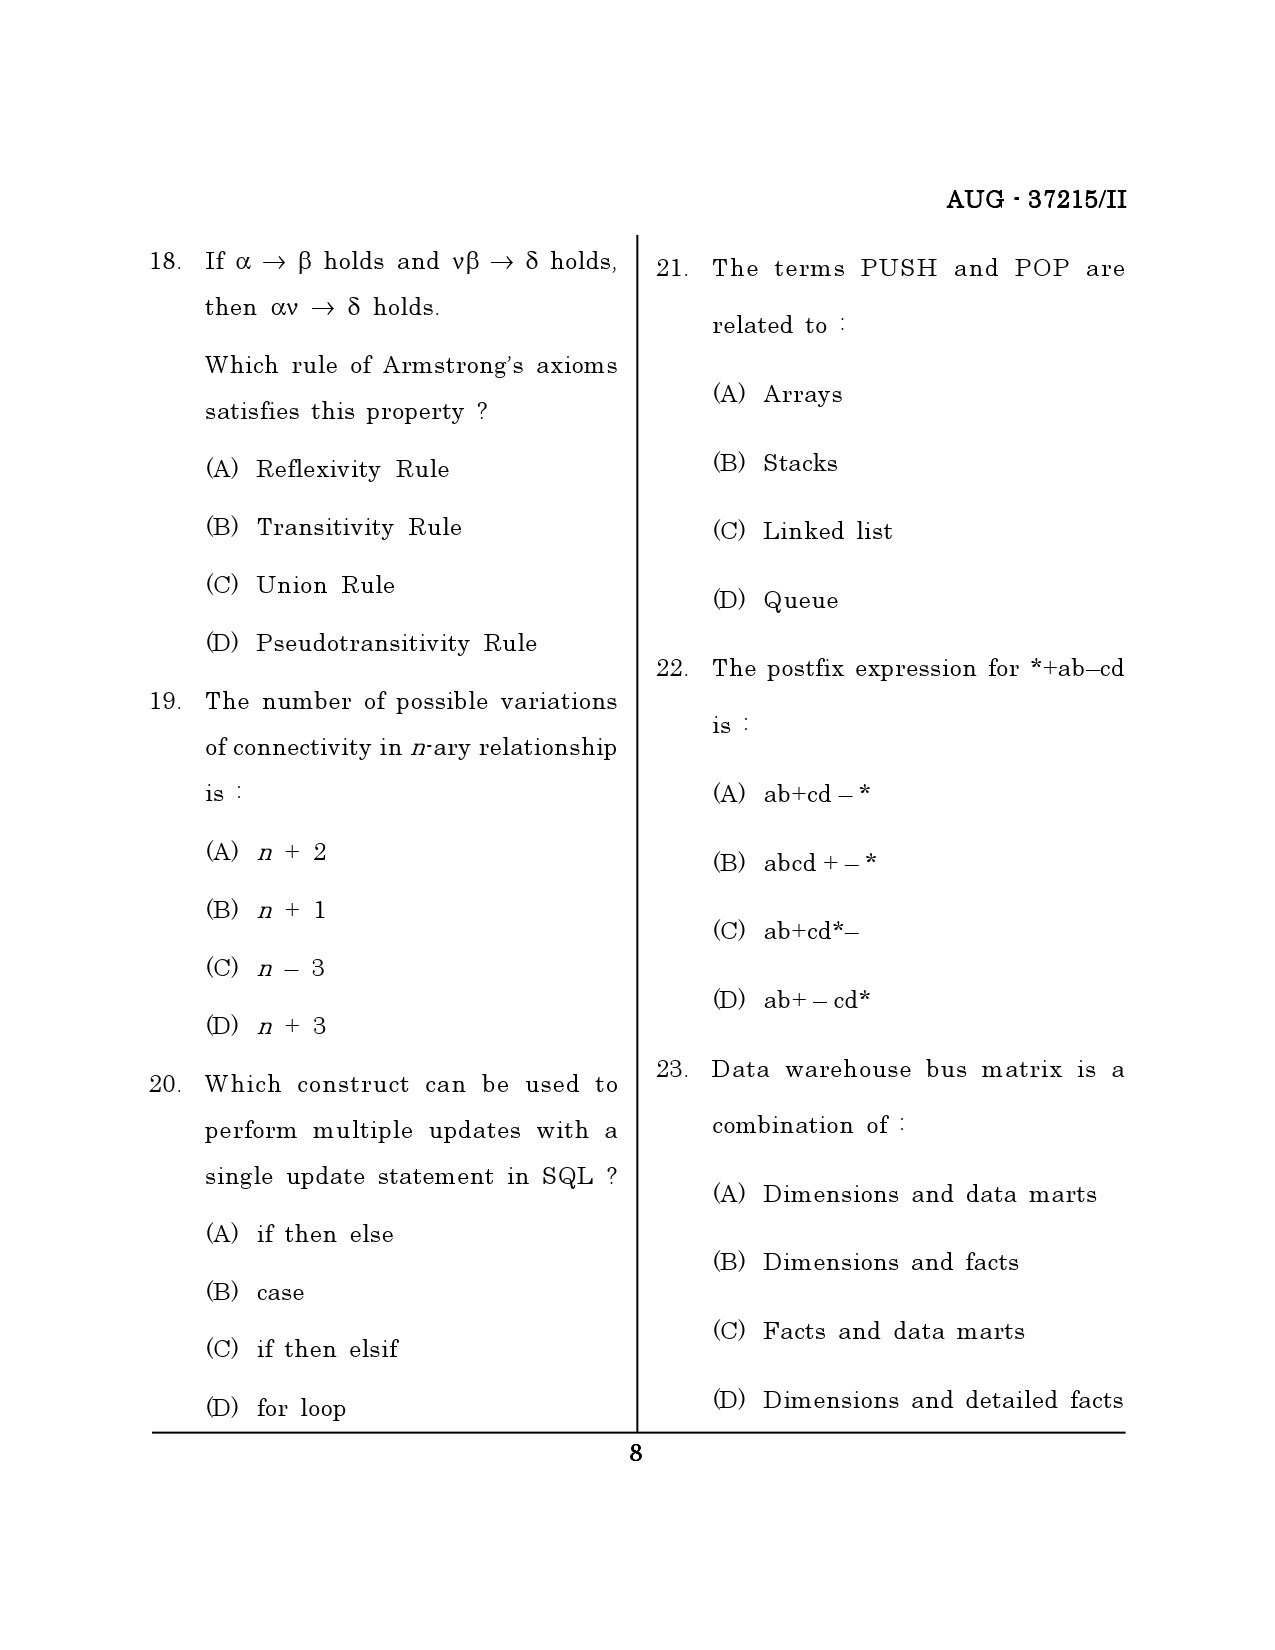 Maharashtra SET Computer Science and Application Question Paper II August 2015 7